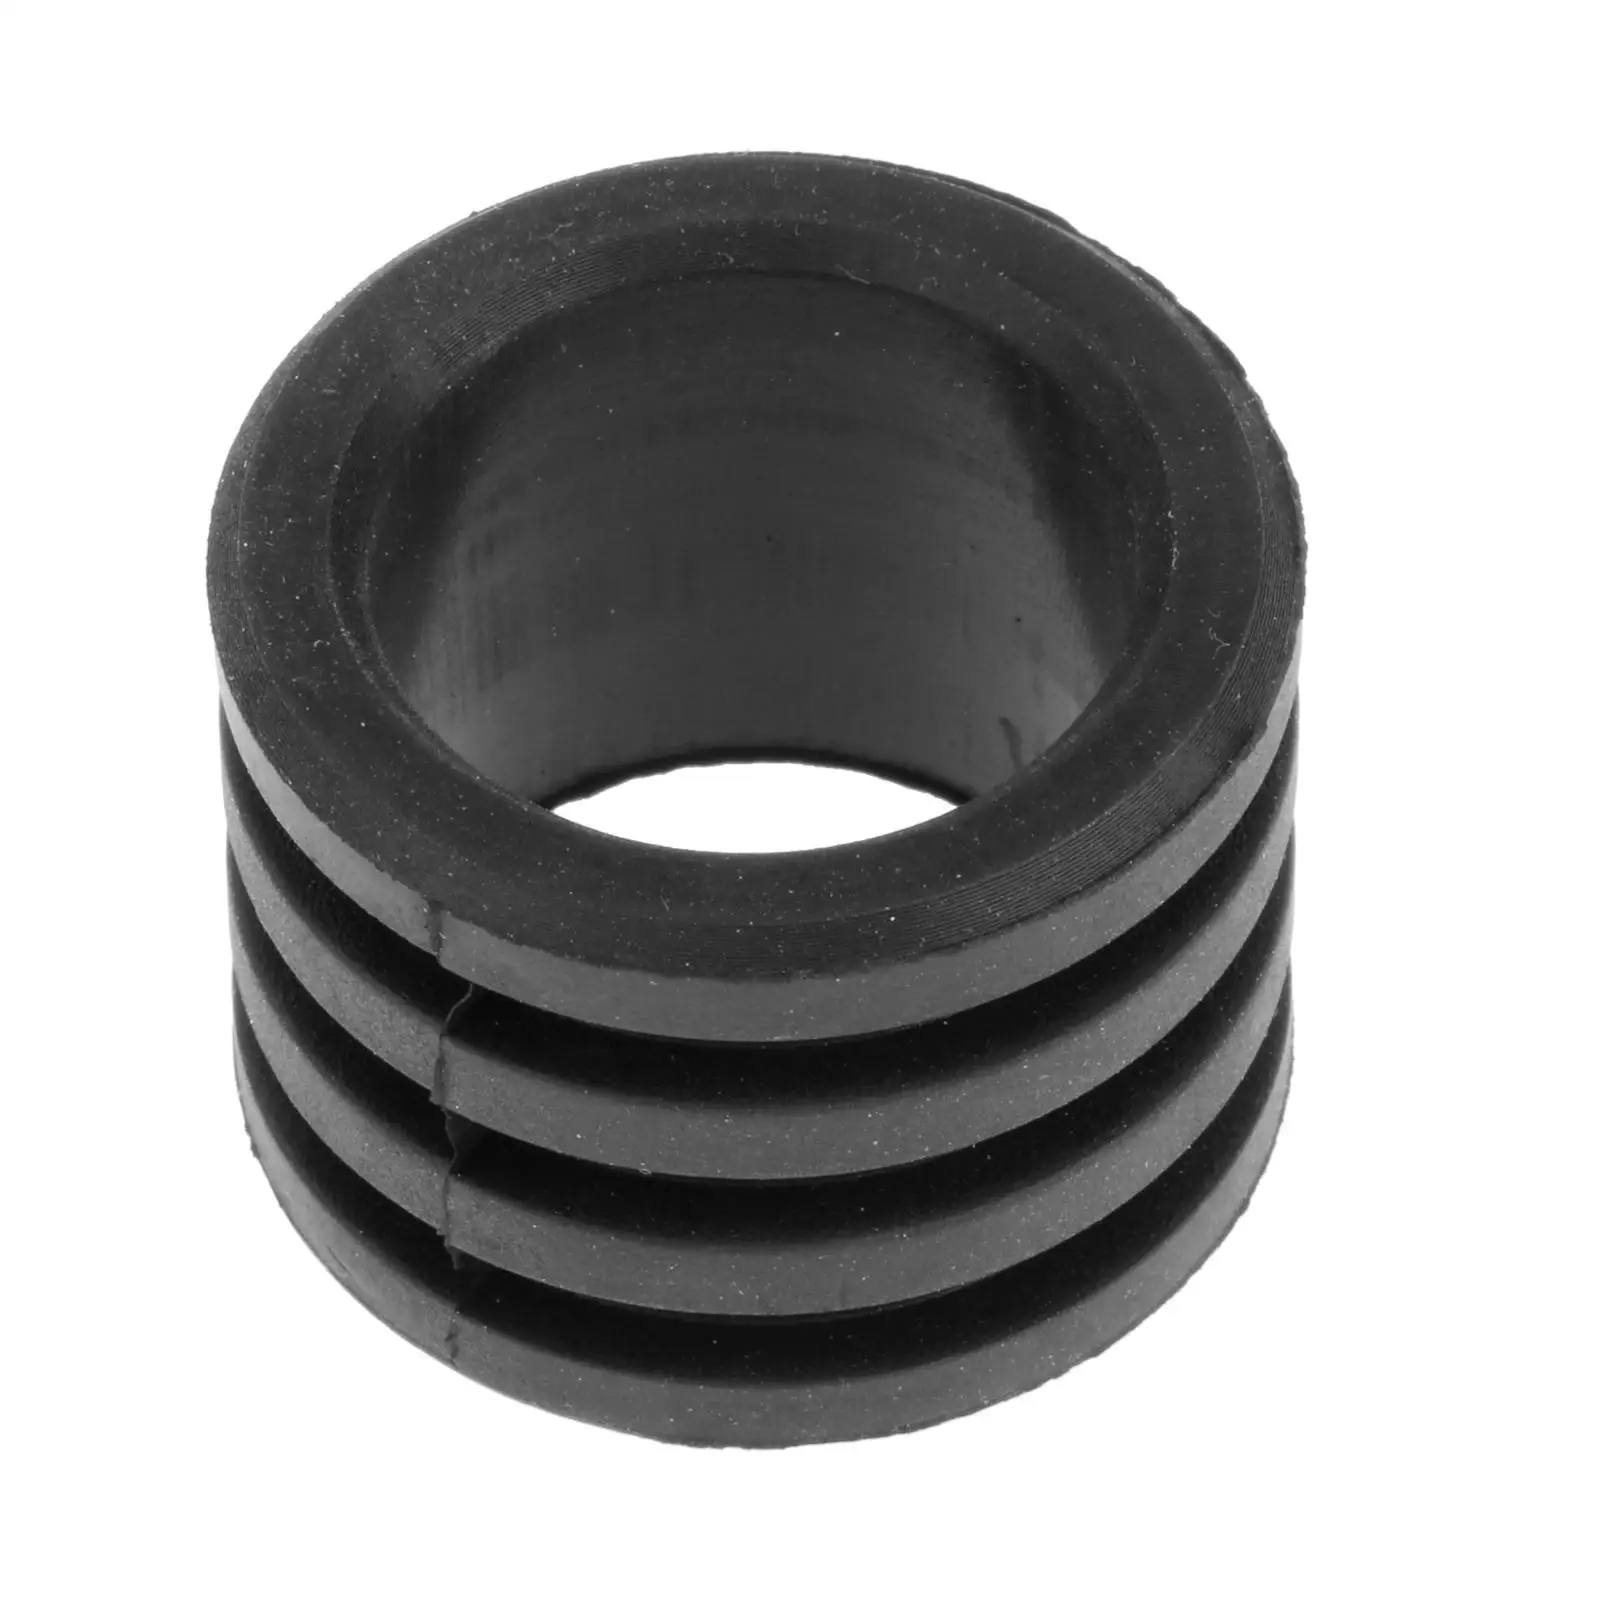 Exhaust Gasket Rubber Flange for 1984-07 18365 KA4 730 2-stroke, Simple Installation,Compact Lightweight